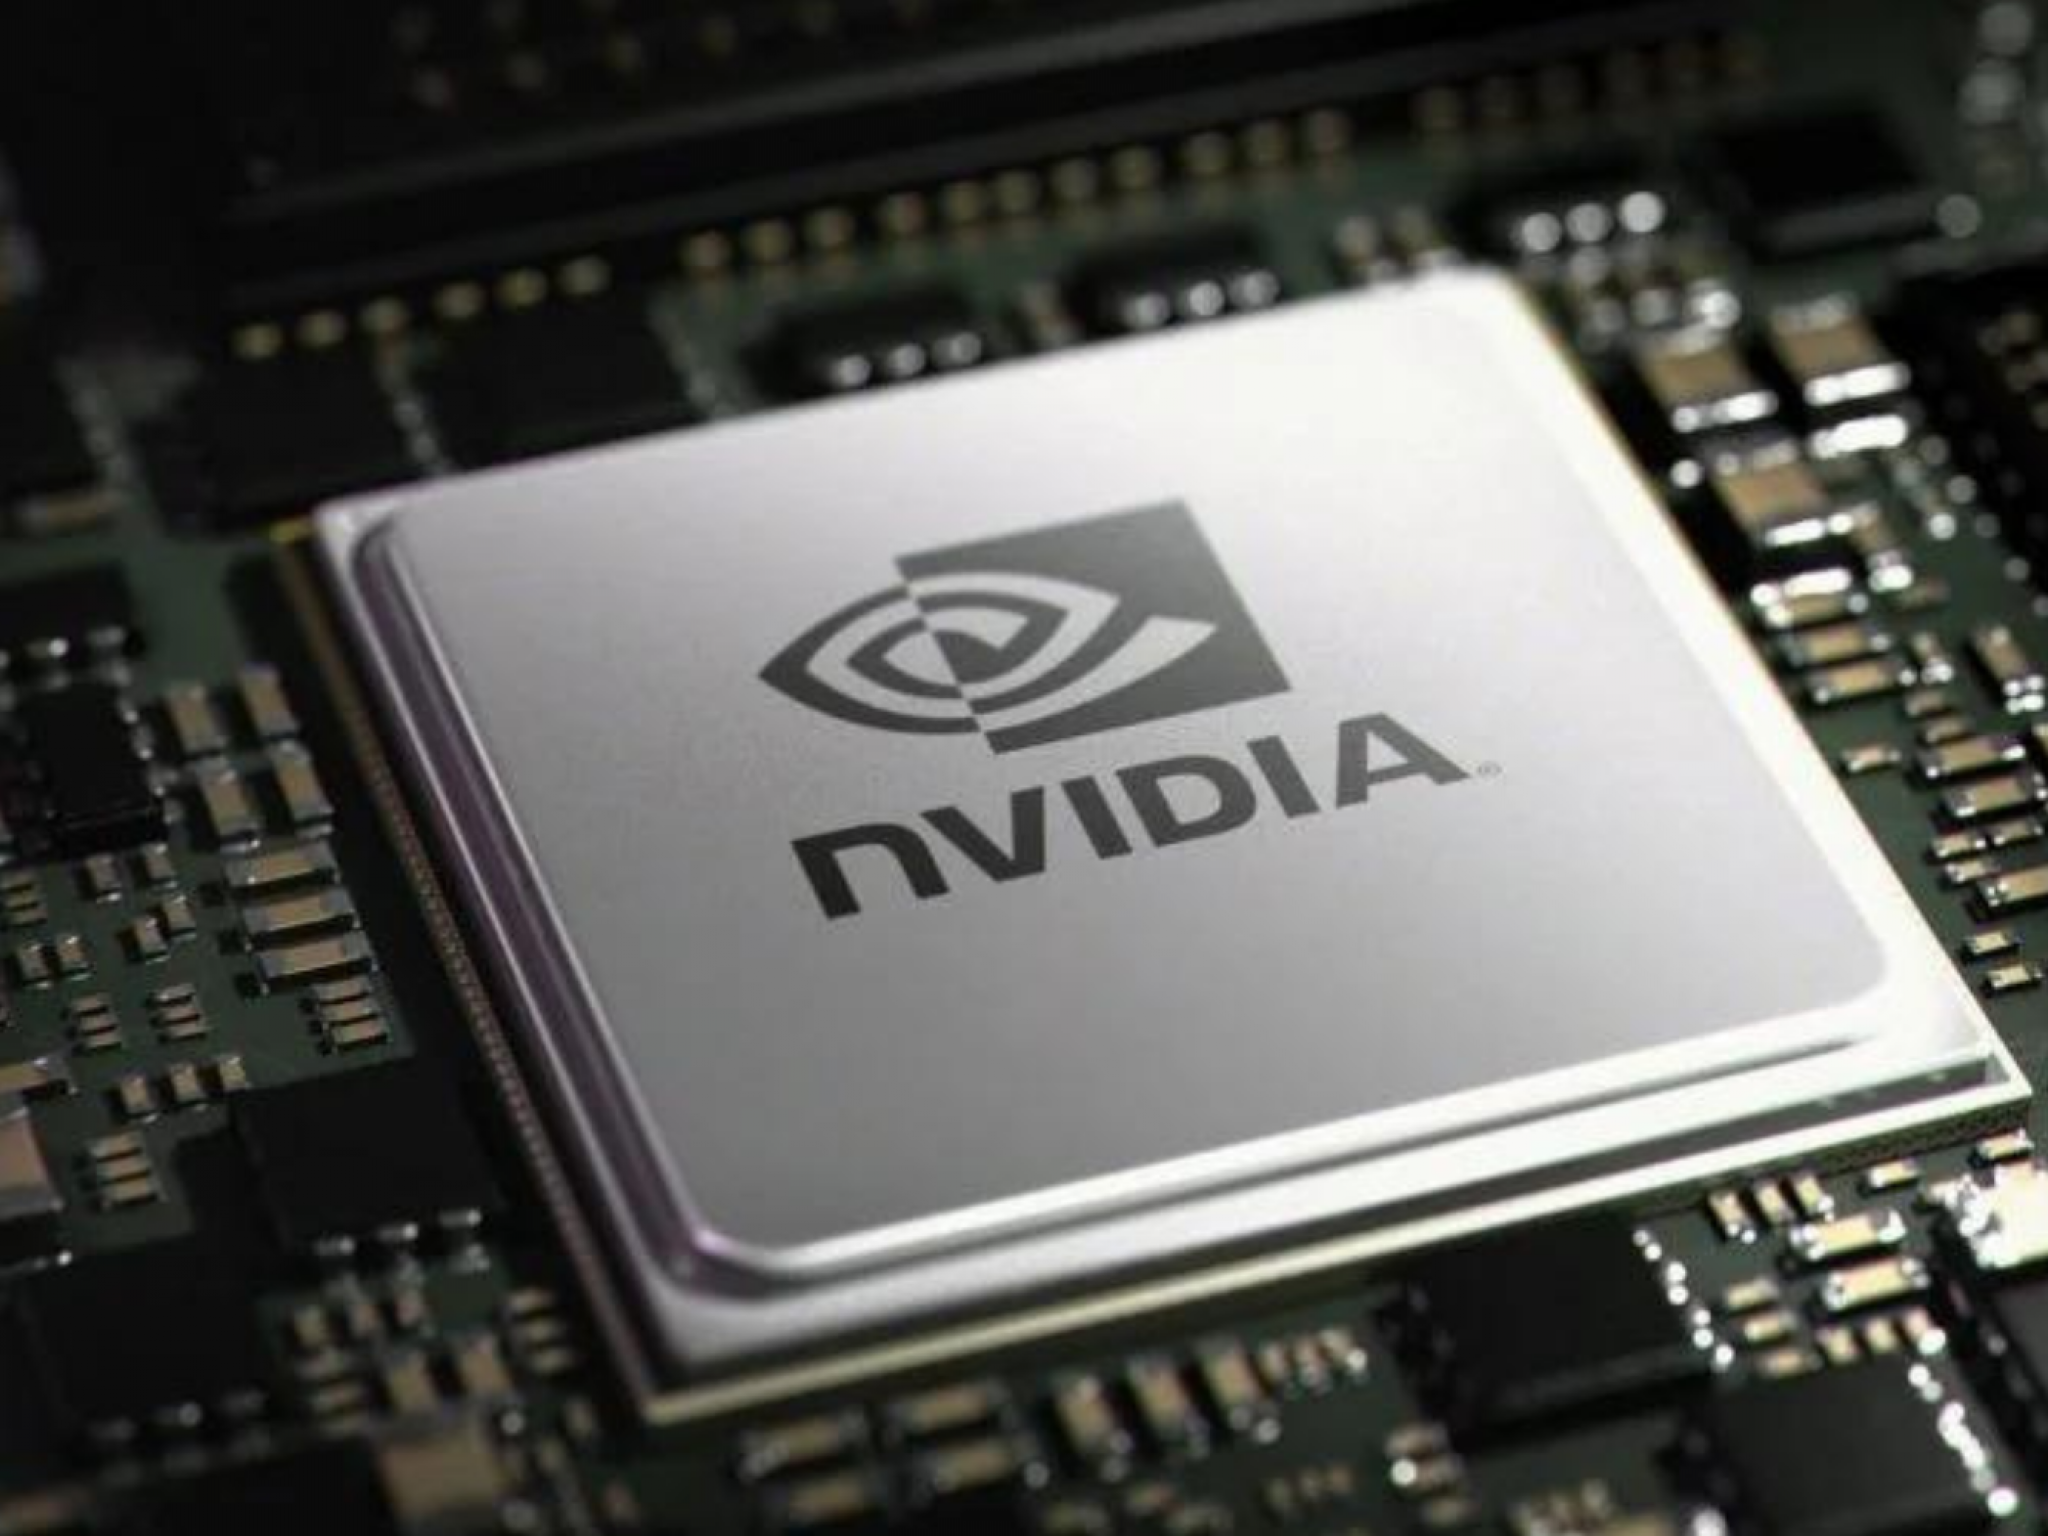  whats-going-on-with-nvidia-stock-thursday 